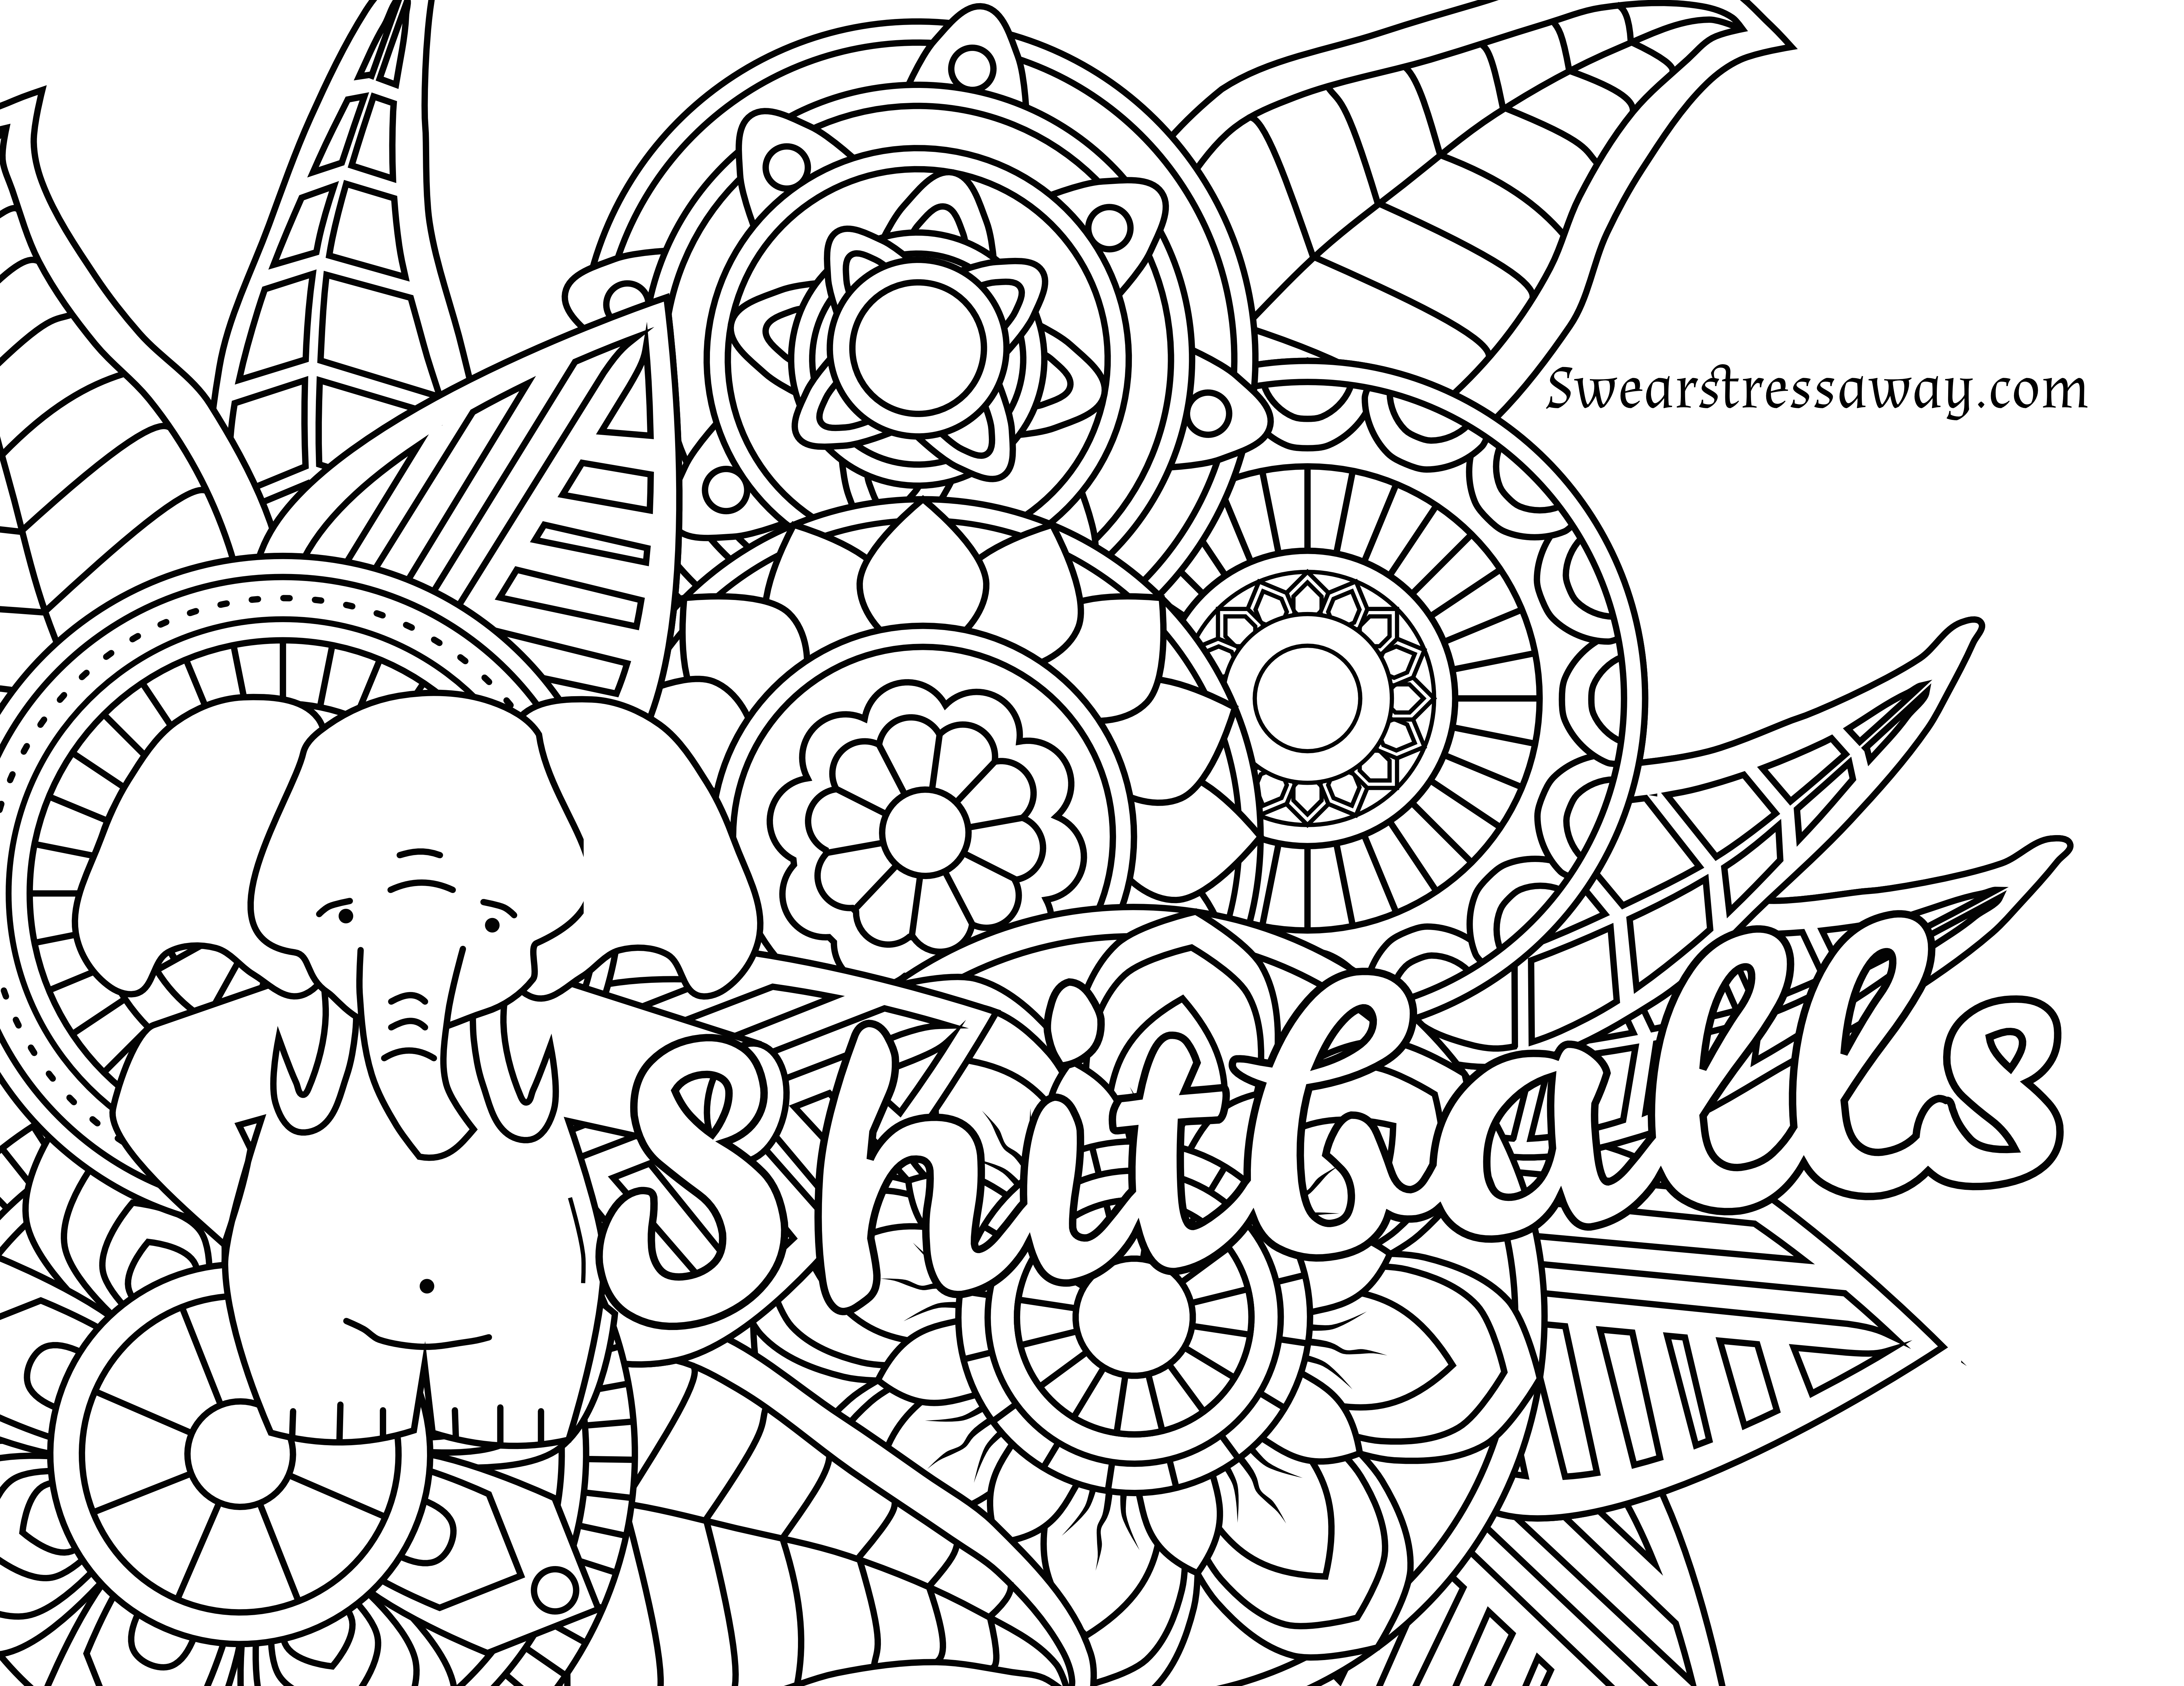 Coloring Pages : Free Printable Coloring Pages Adults Quotes For - Free Printable Coloring Book Pages For Adults